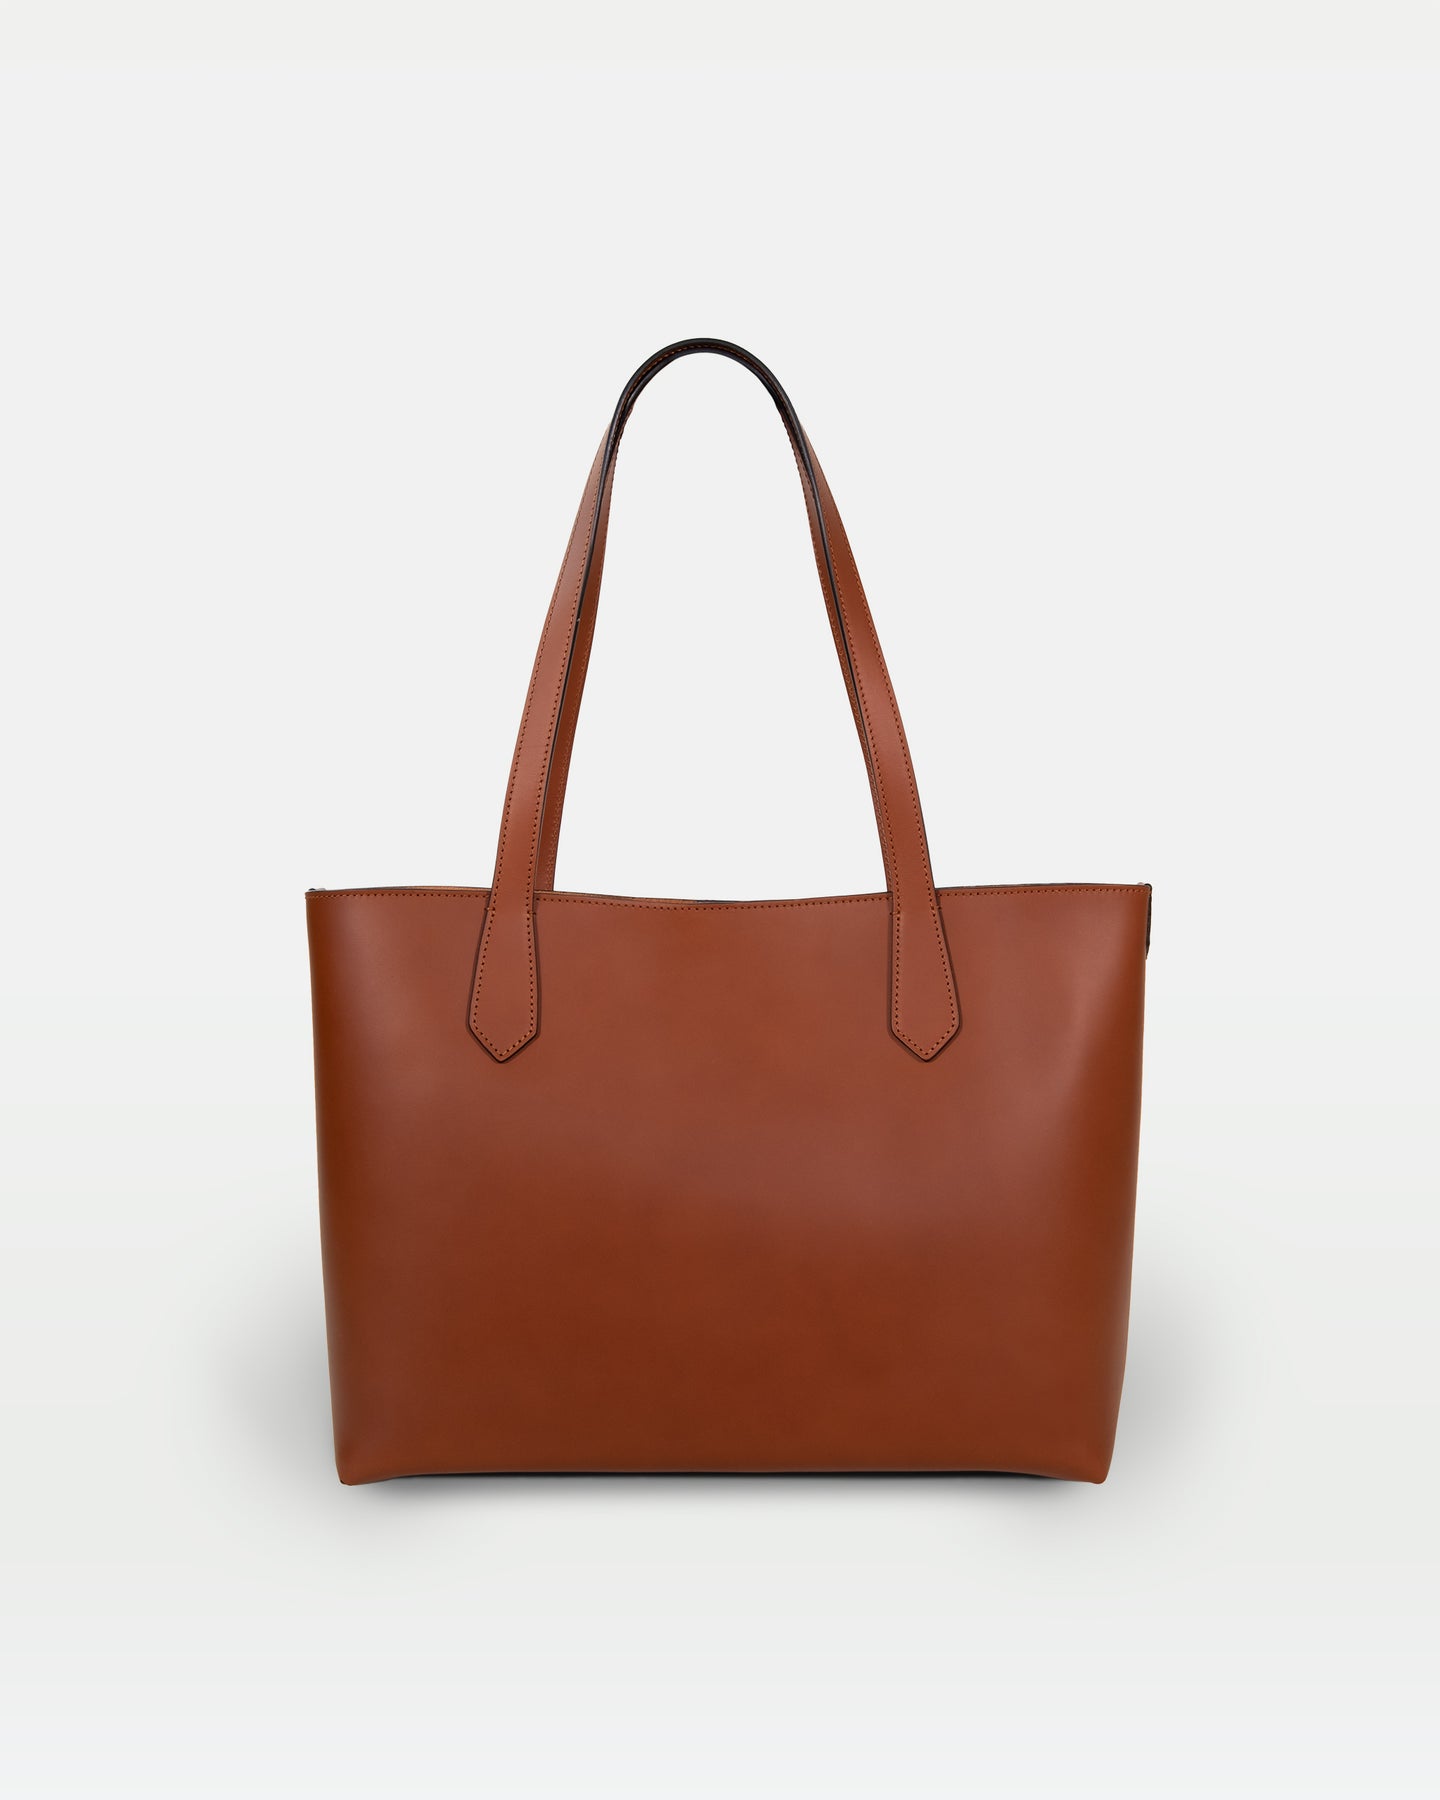 Elba structured tote bag in eco-friendly vegetable-tanned leather. Made ...